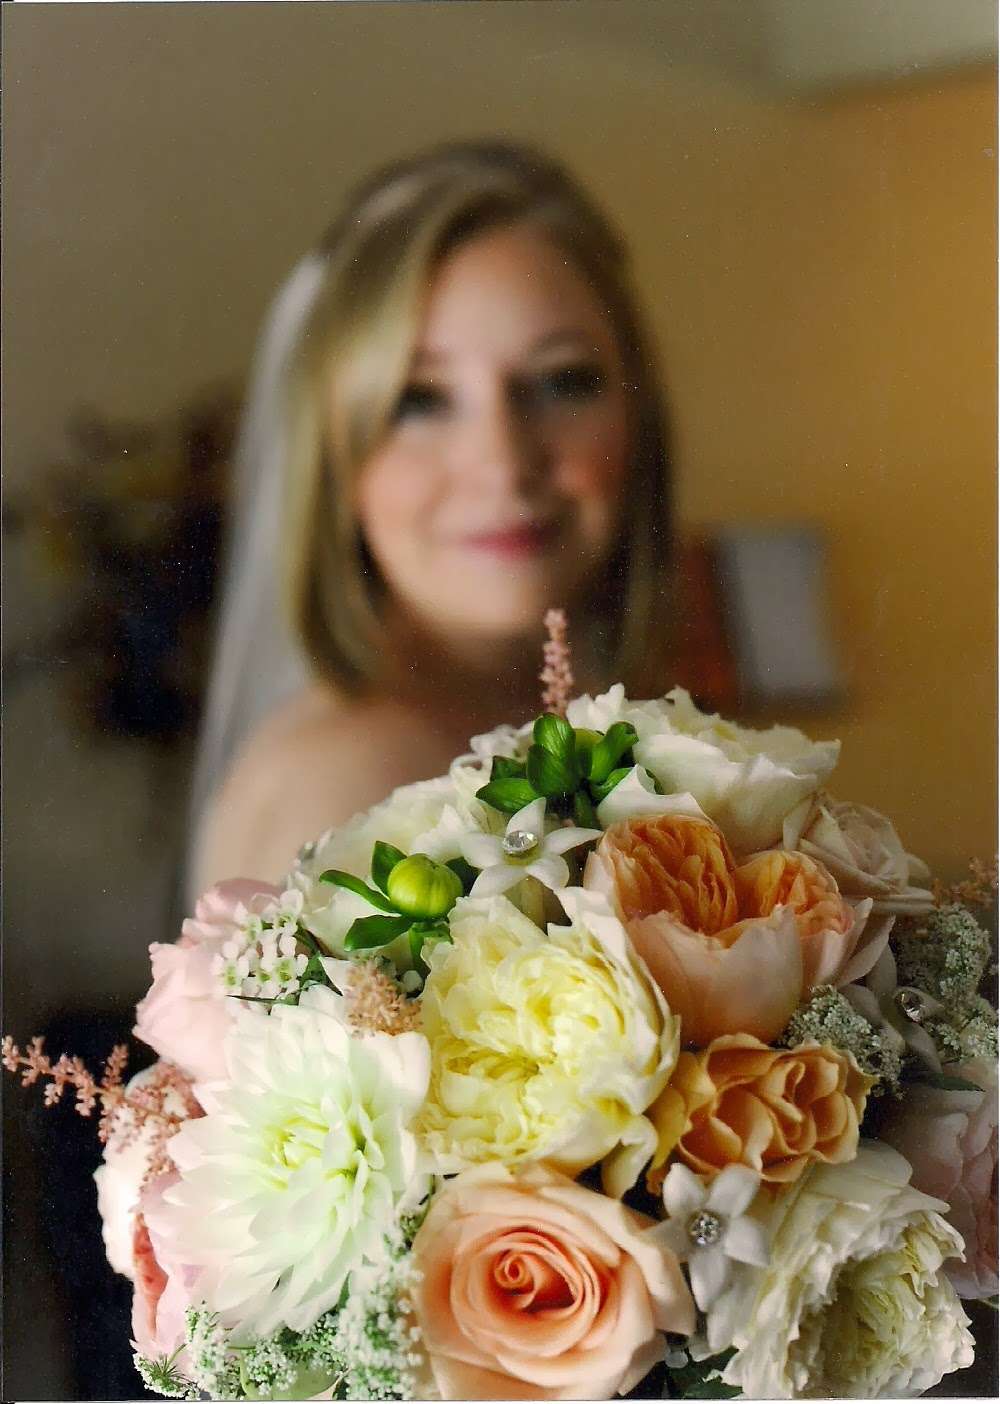 Carrs Floral Wedding Designs | 10948 W 167th St, Orland Park, IL 60467, USA | Phone: (708) 403-8933